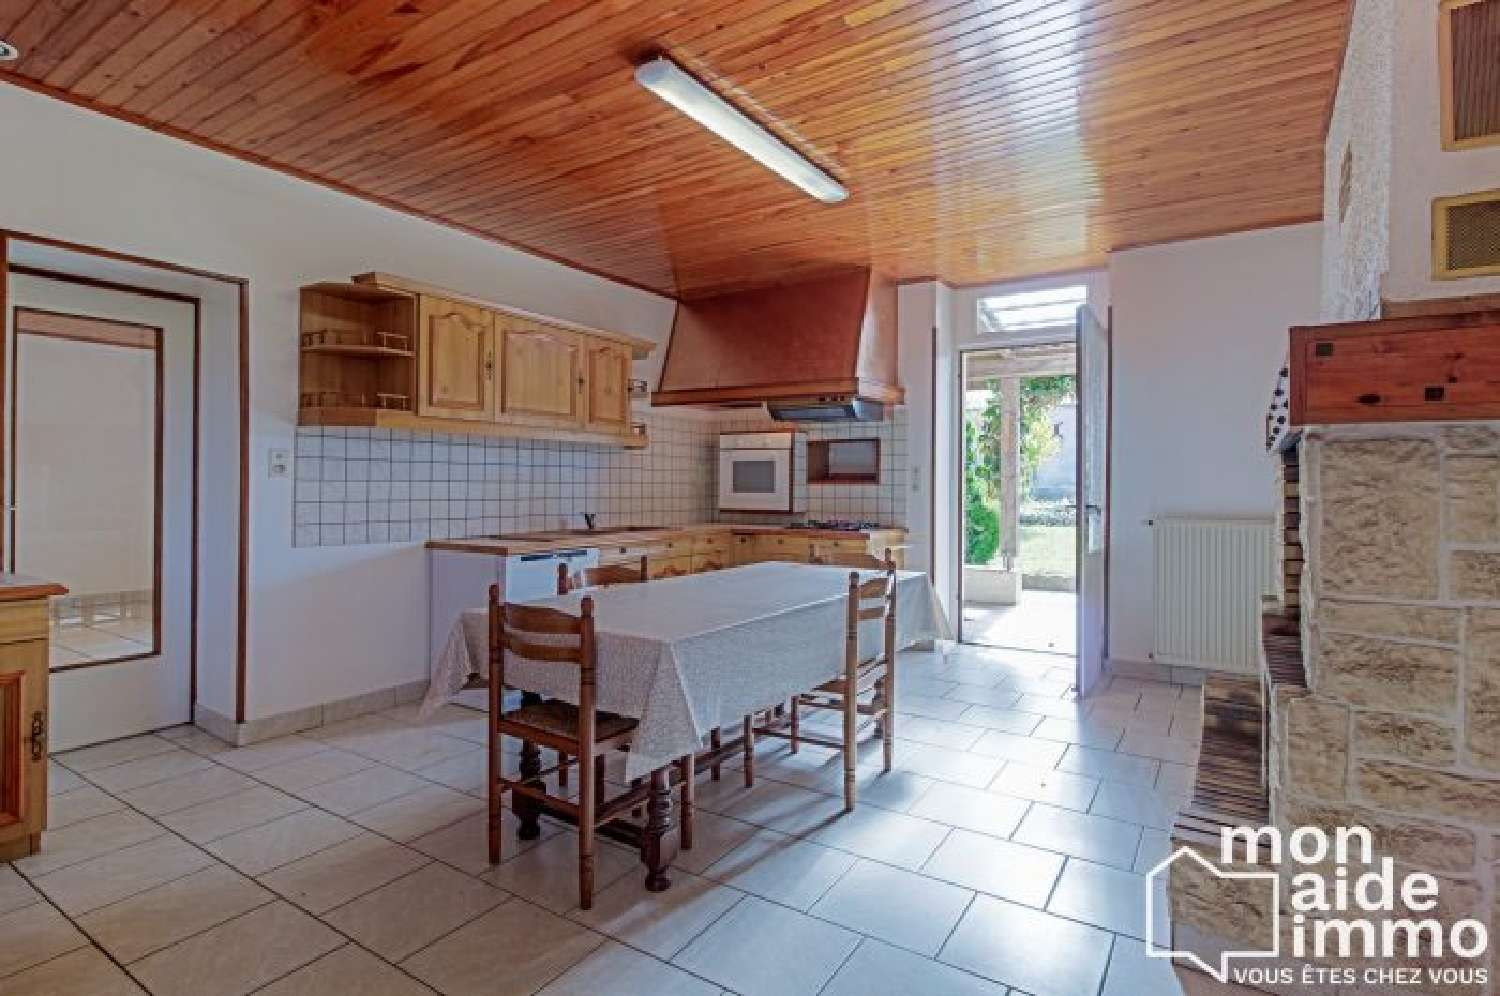  for sale house Grignols Gironde 5